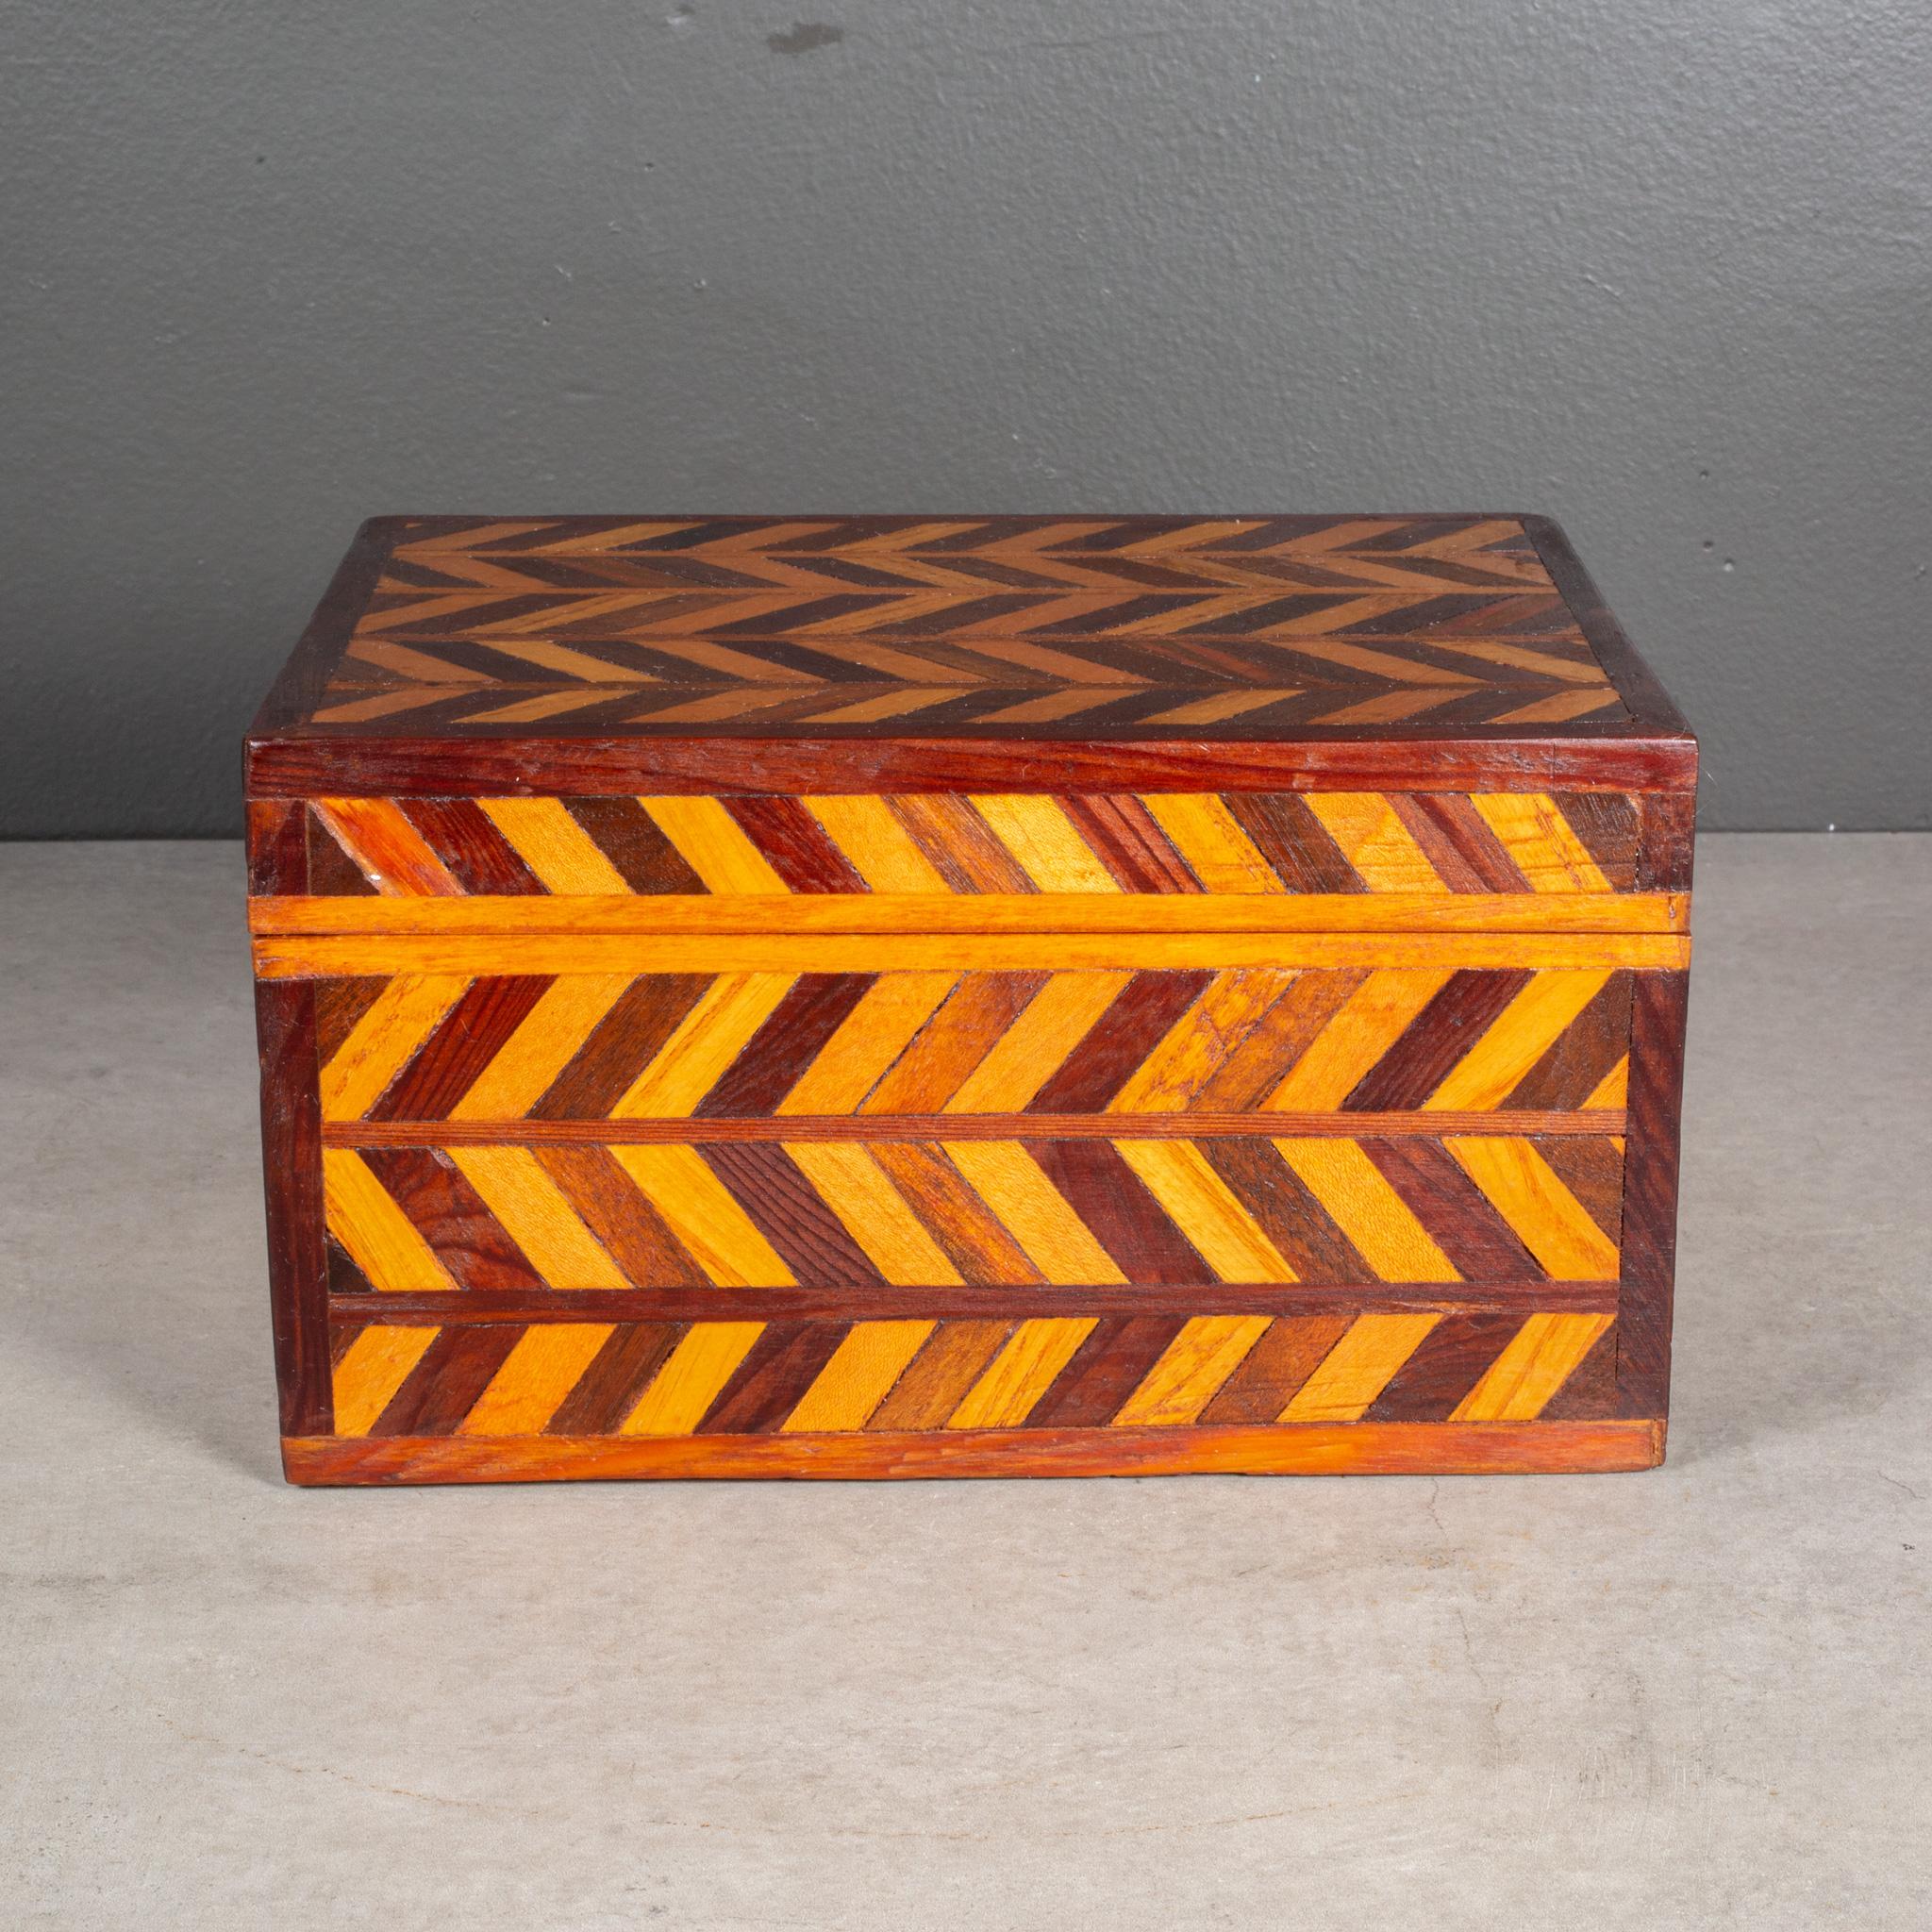 ABOUT

An early 20th century handmade herringbone wooden box with inlay Mahogany, Cherry and Oak veneer.

    CREATOR Unknown.
    DATE OF MANUFACTURE c.1940-1950. 
    MATERIALS AND TECHNIQUES Oak, Cherry, Mahogany Veneer. Laminate inside. 
   